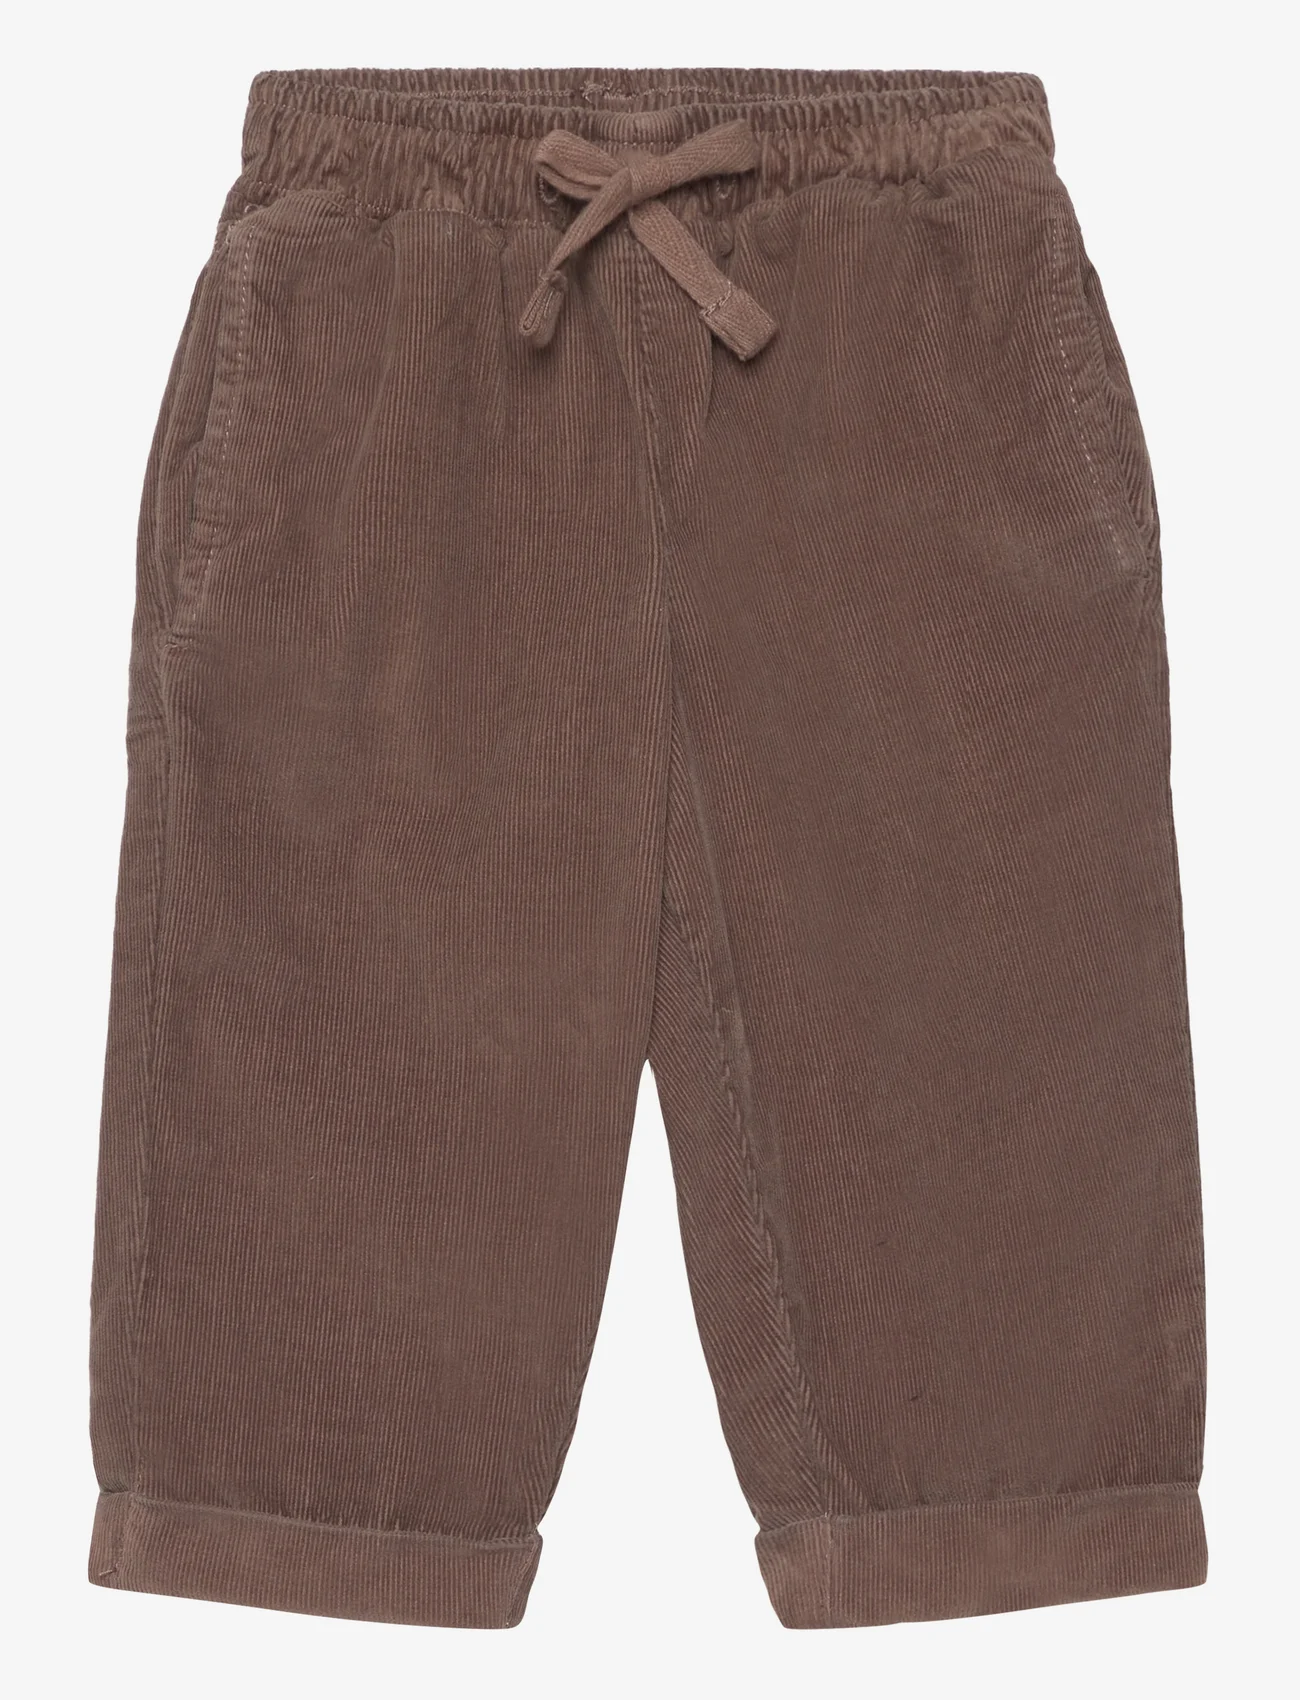 Sofie Schnoor Baby and Kids - Trousers - lowest prices - medium brown - 0